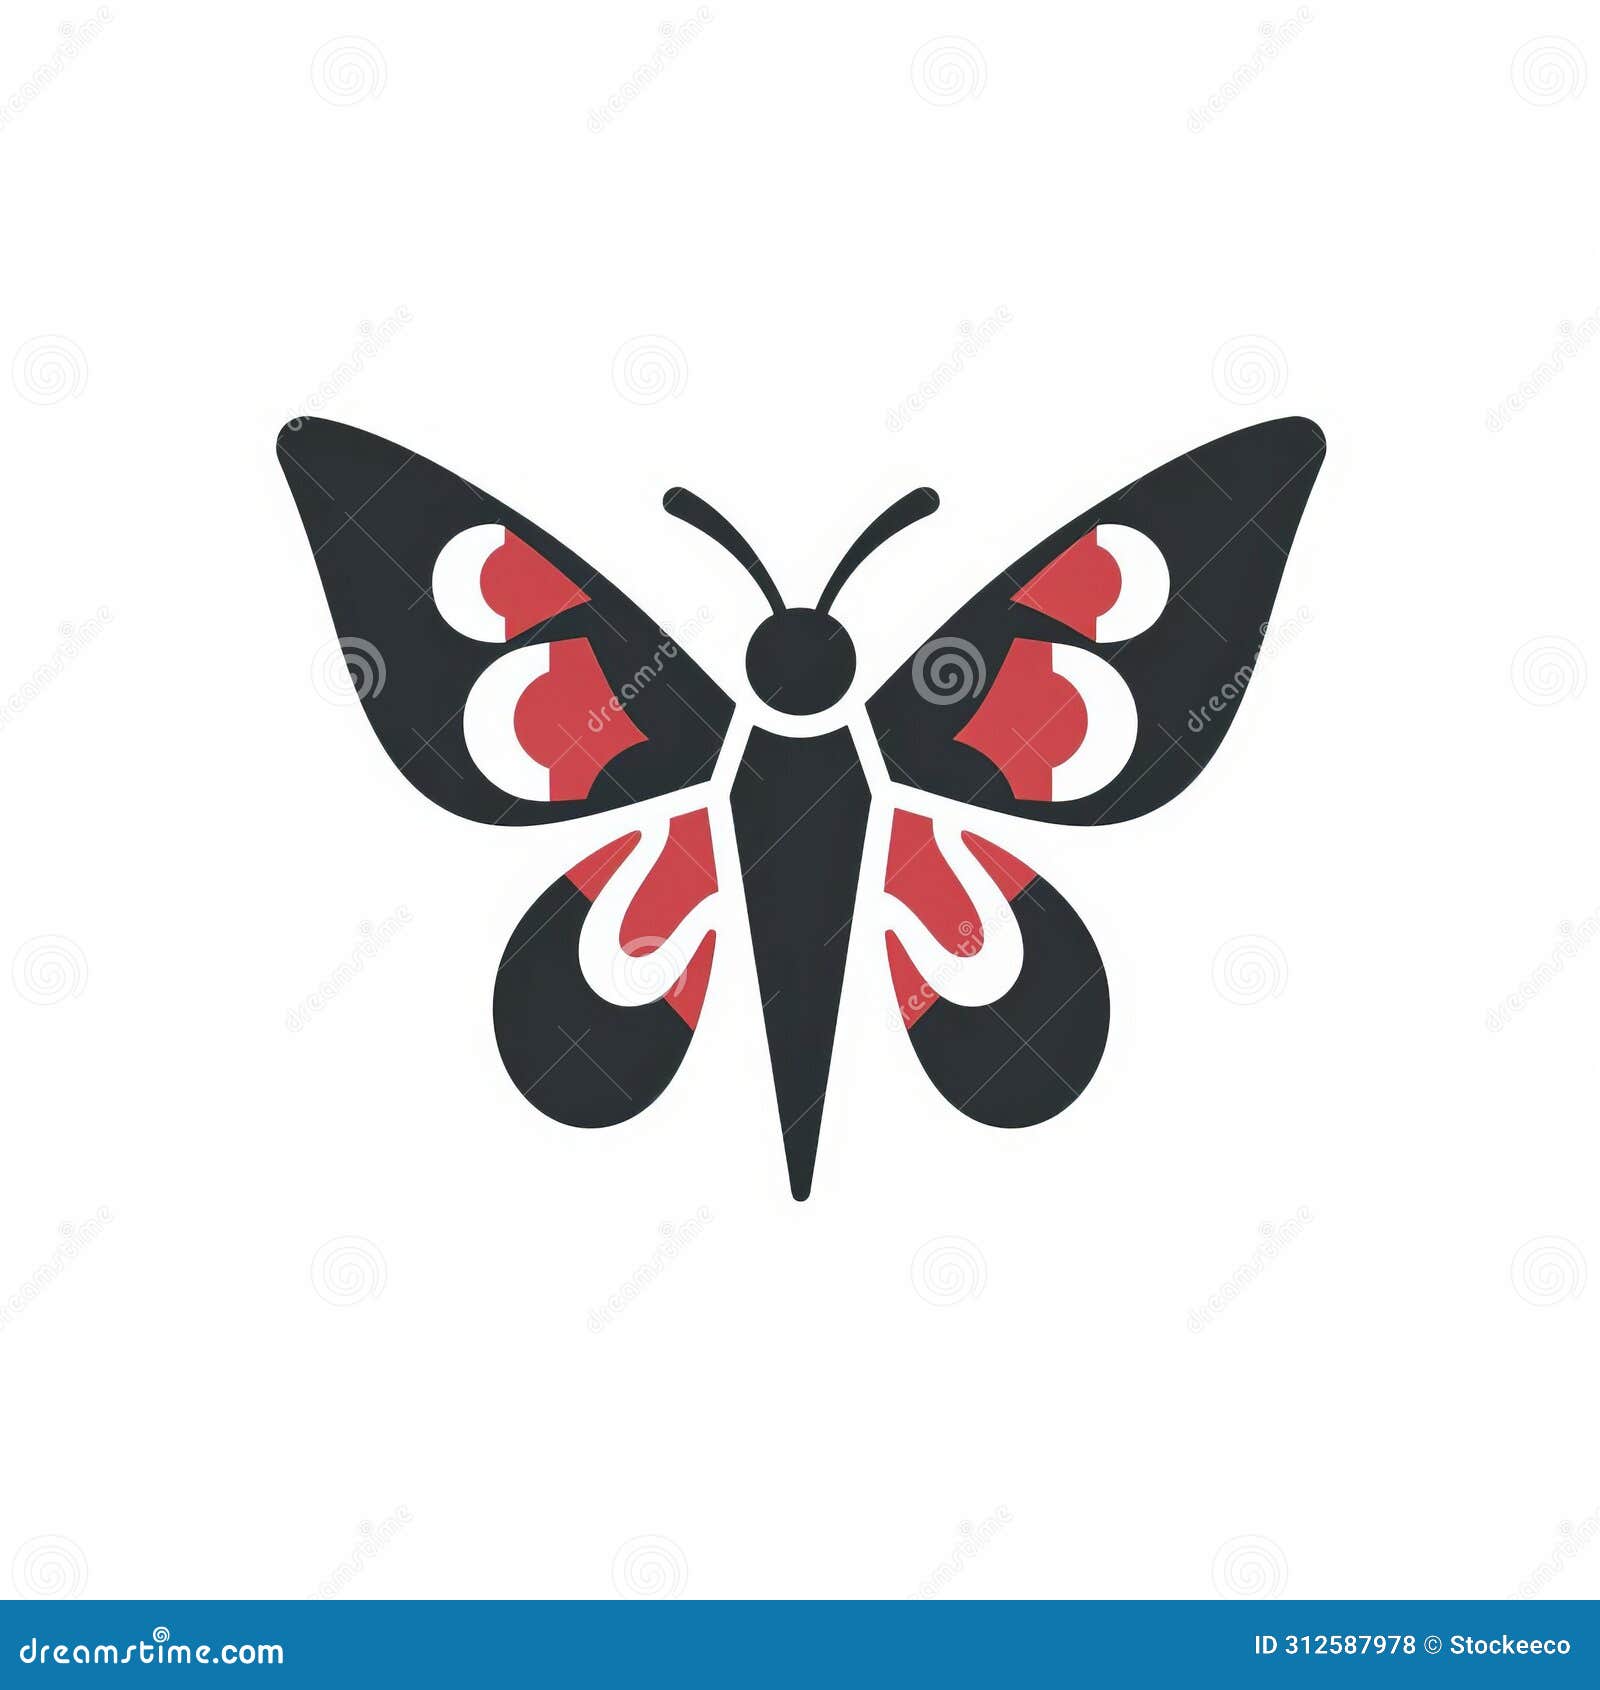 eye-catching butterfly logo with stenciled iconography